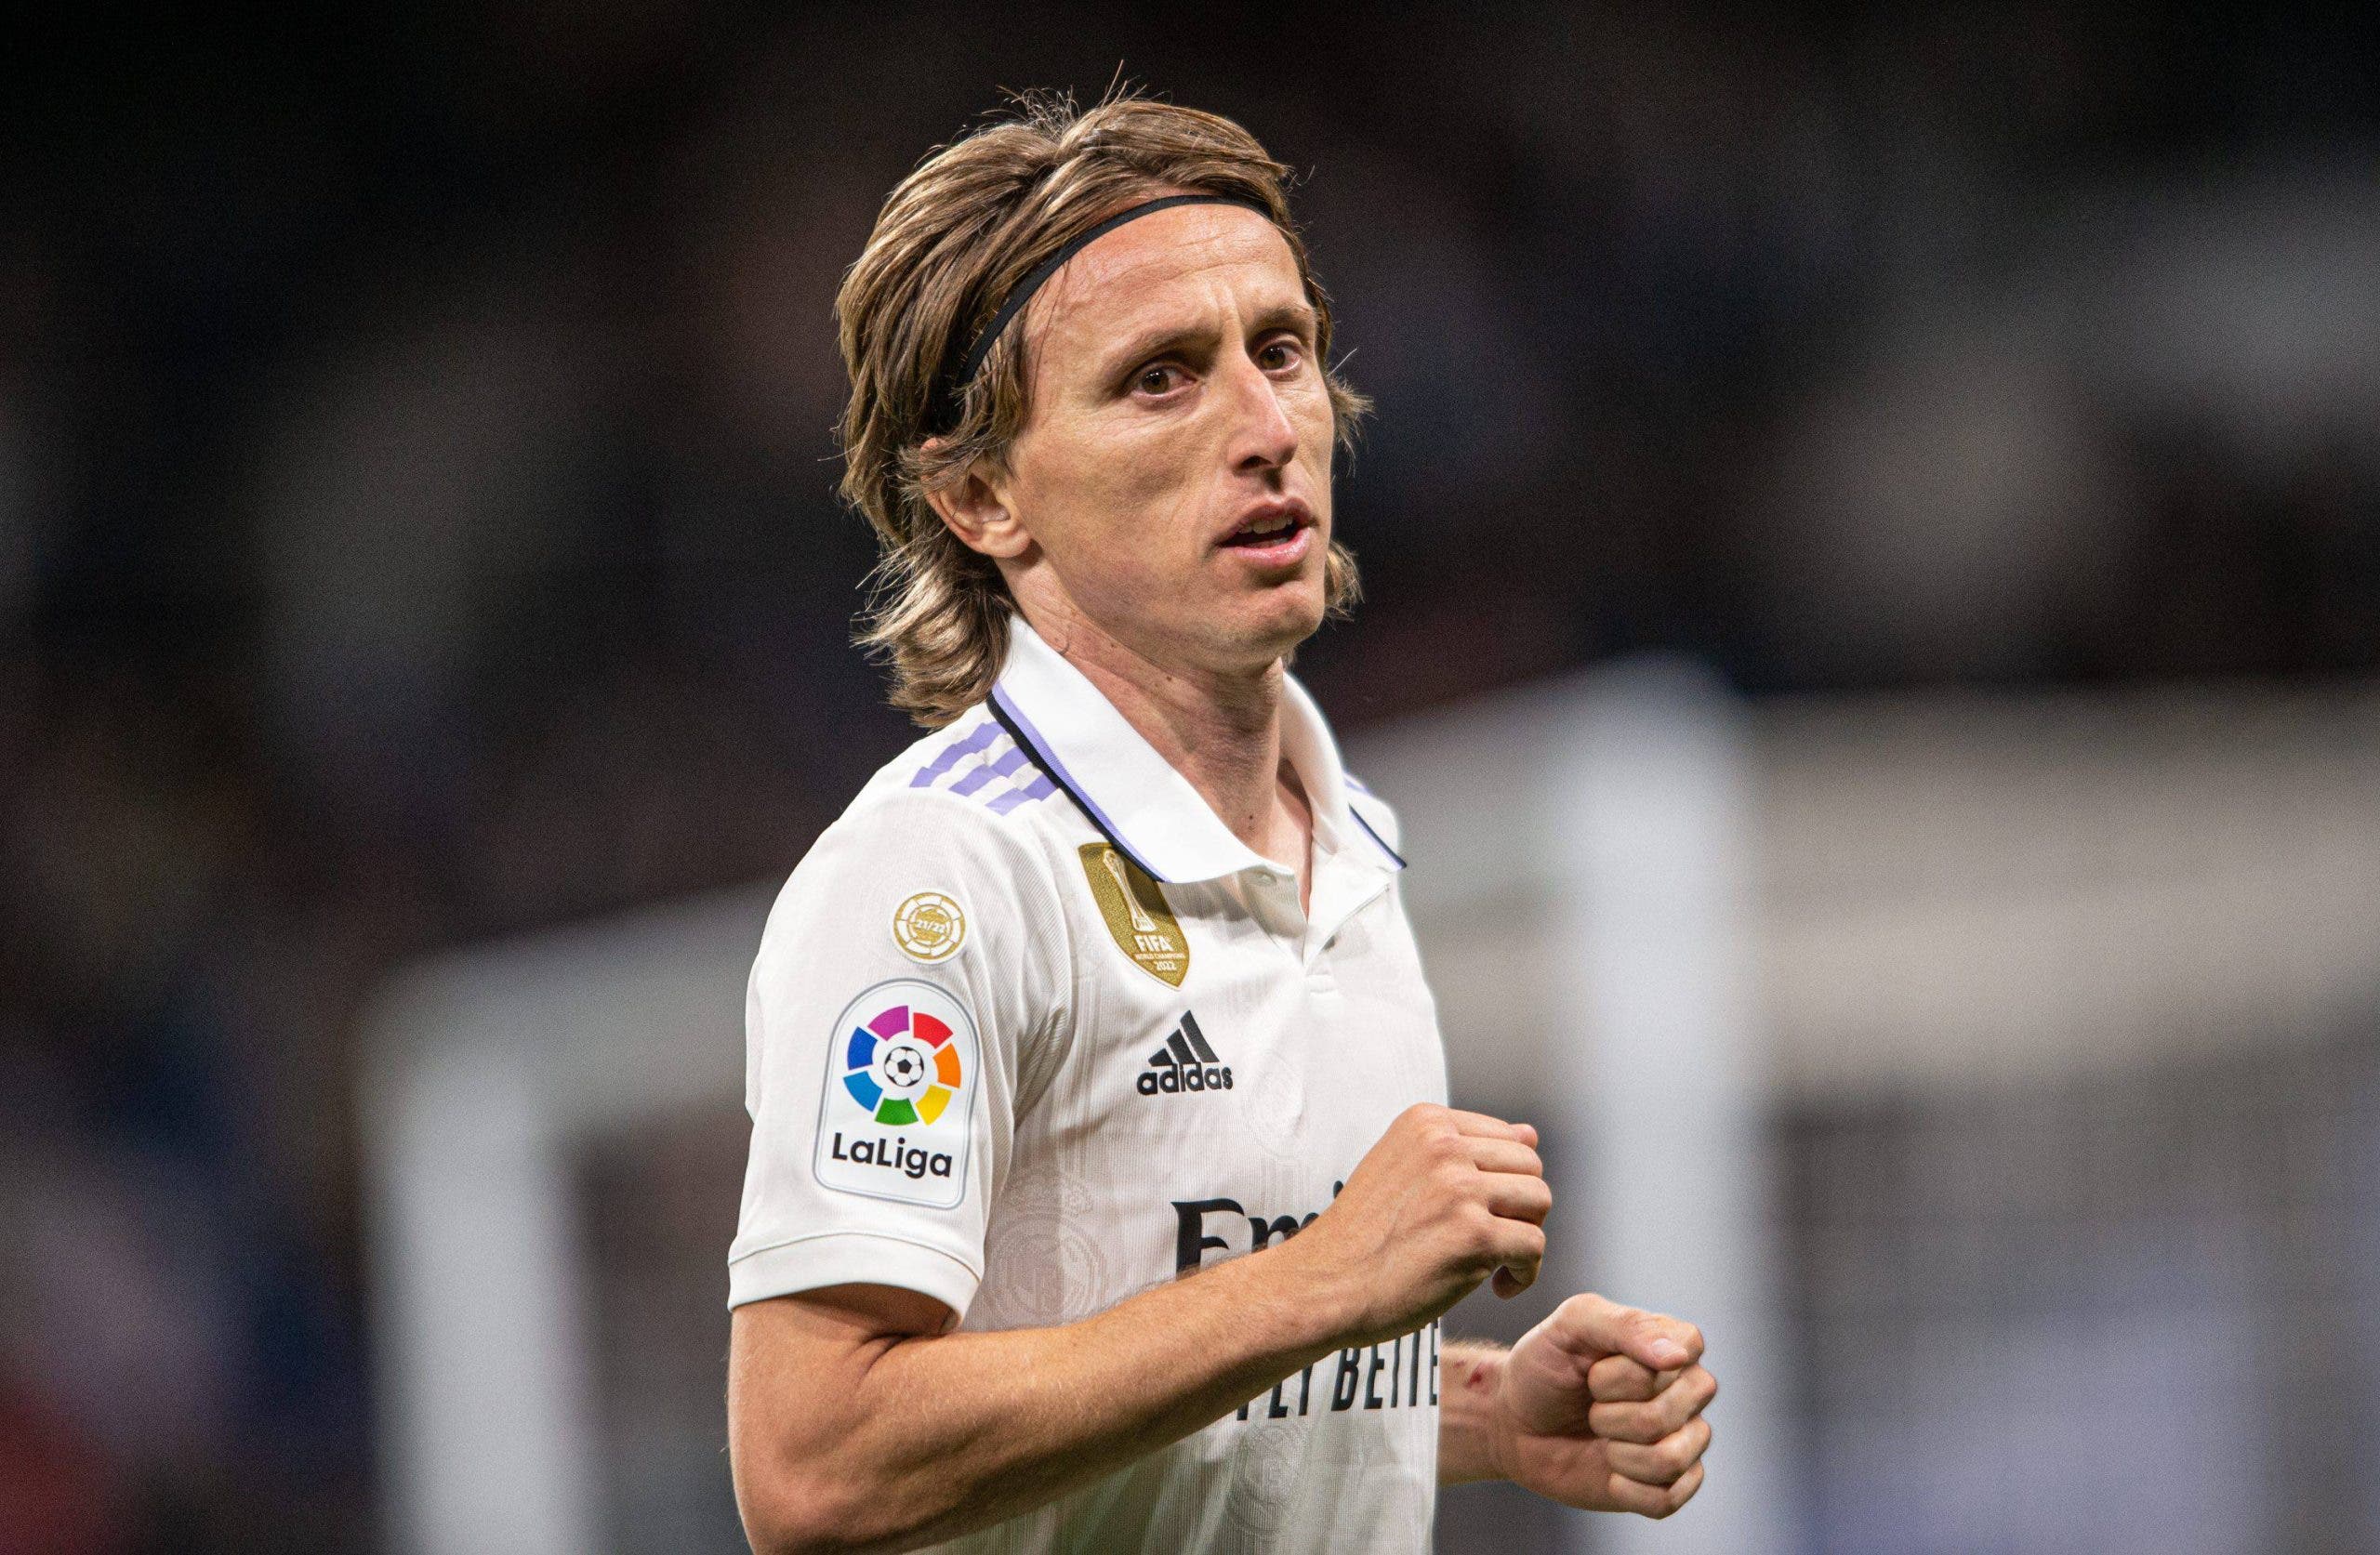 Modric doesn't wait any longer: he tells Real Madrid about his future
	

